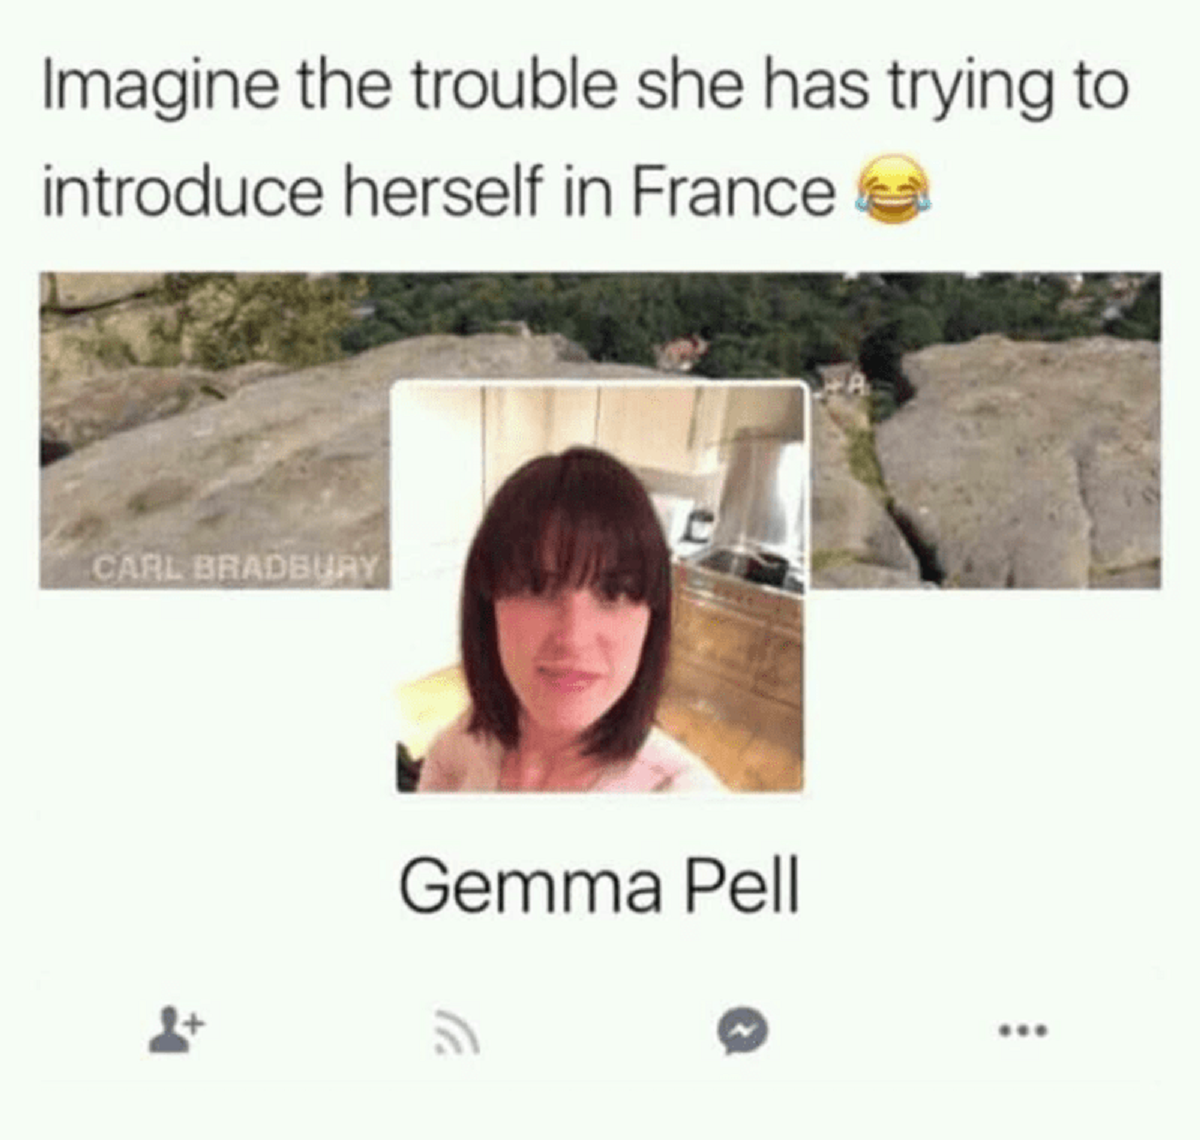 imagine the trouble she has introducing herself - Imagine the trouble she has trying to introduce herself in France Carl Bradbury Gemma Pell